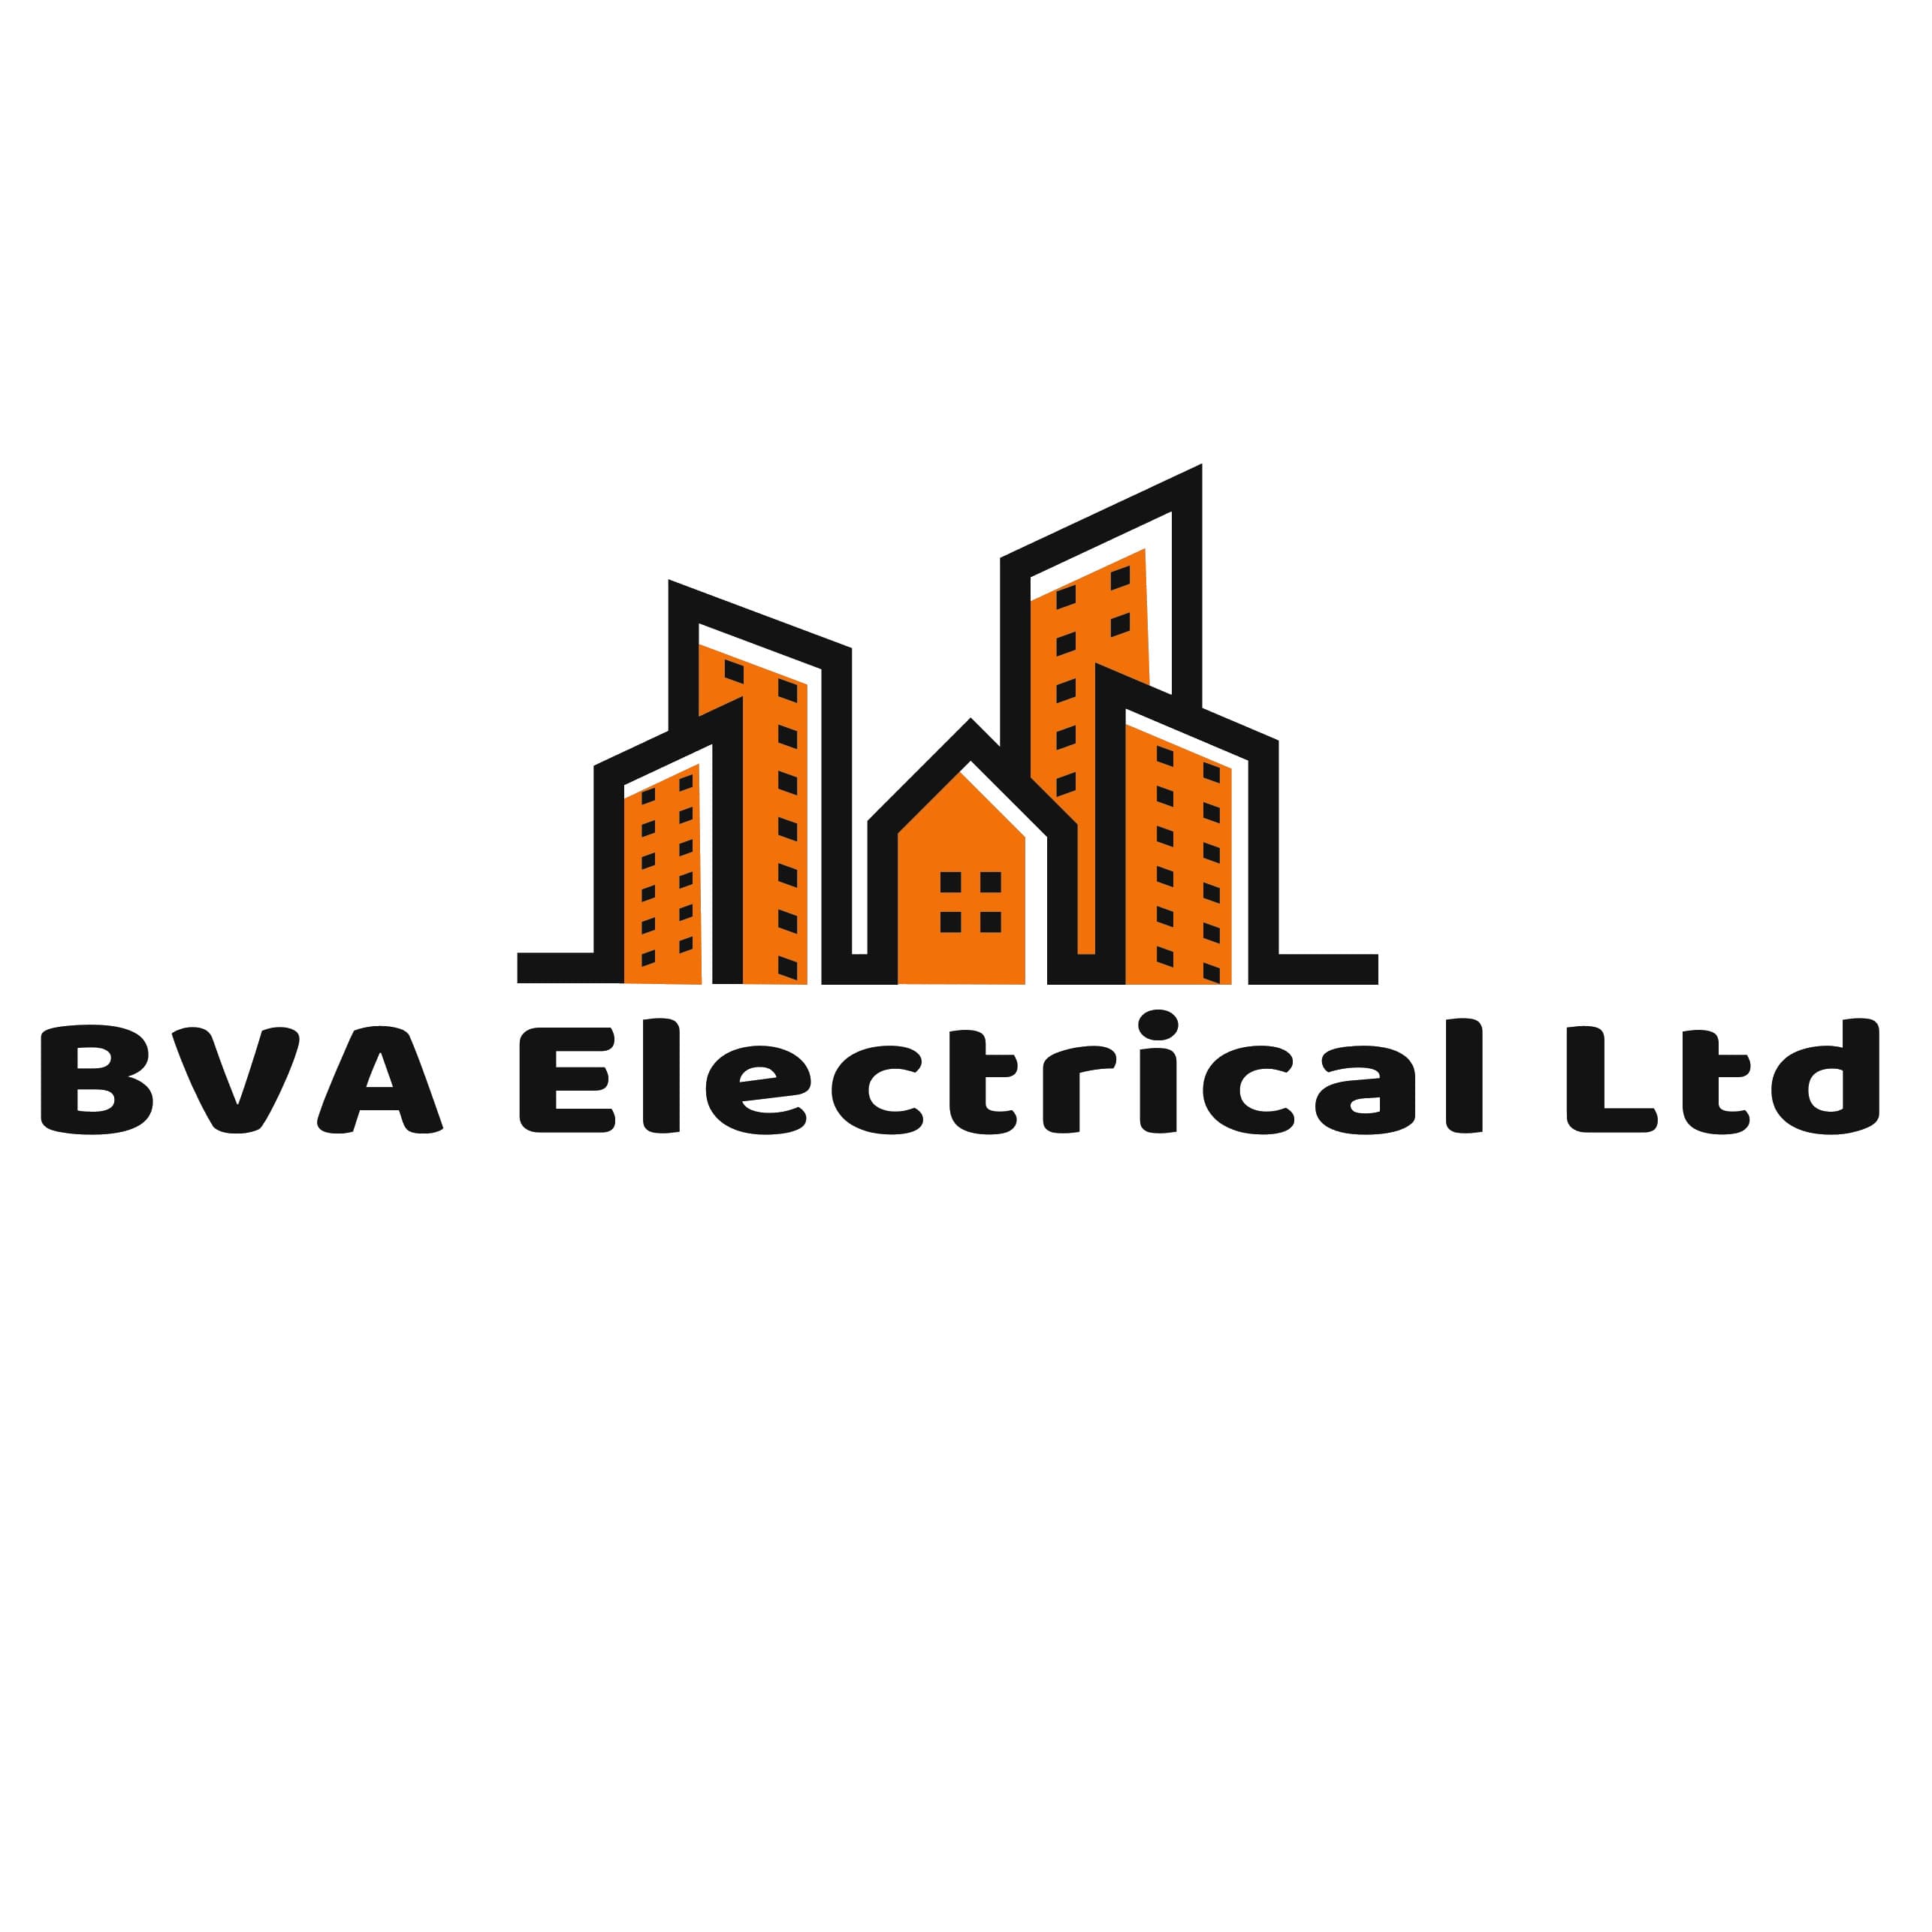 Full service electrical company, offering quality work at a competitive price.